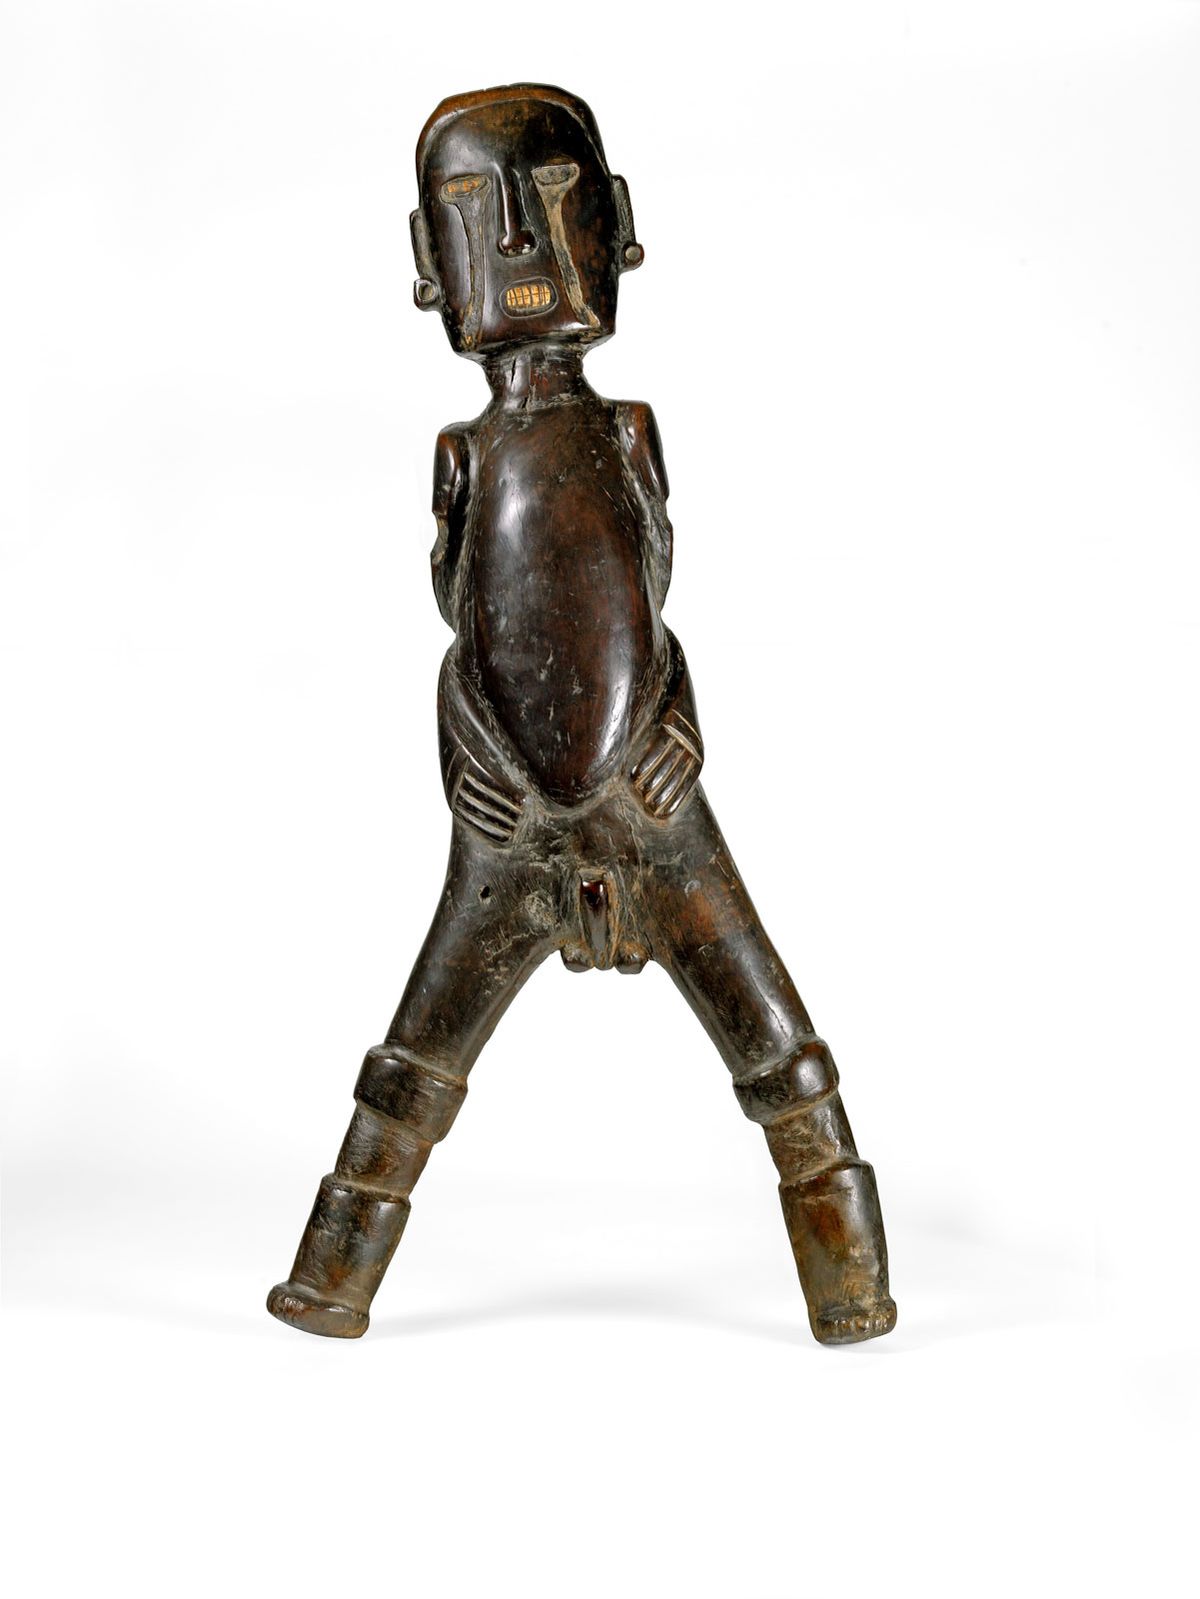 This wooden sculpture possibly representing Boinayel the Rain Giver was made by the Taino people © Trustees of the British Museum.